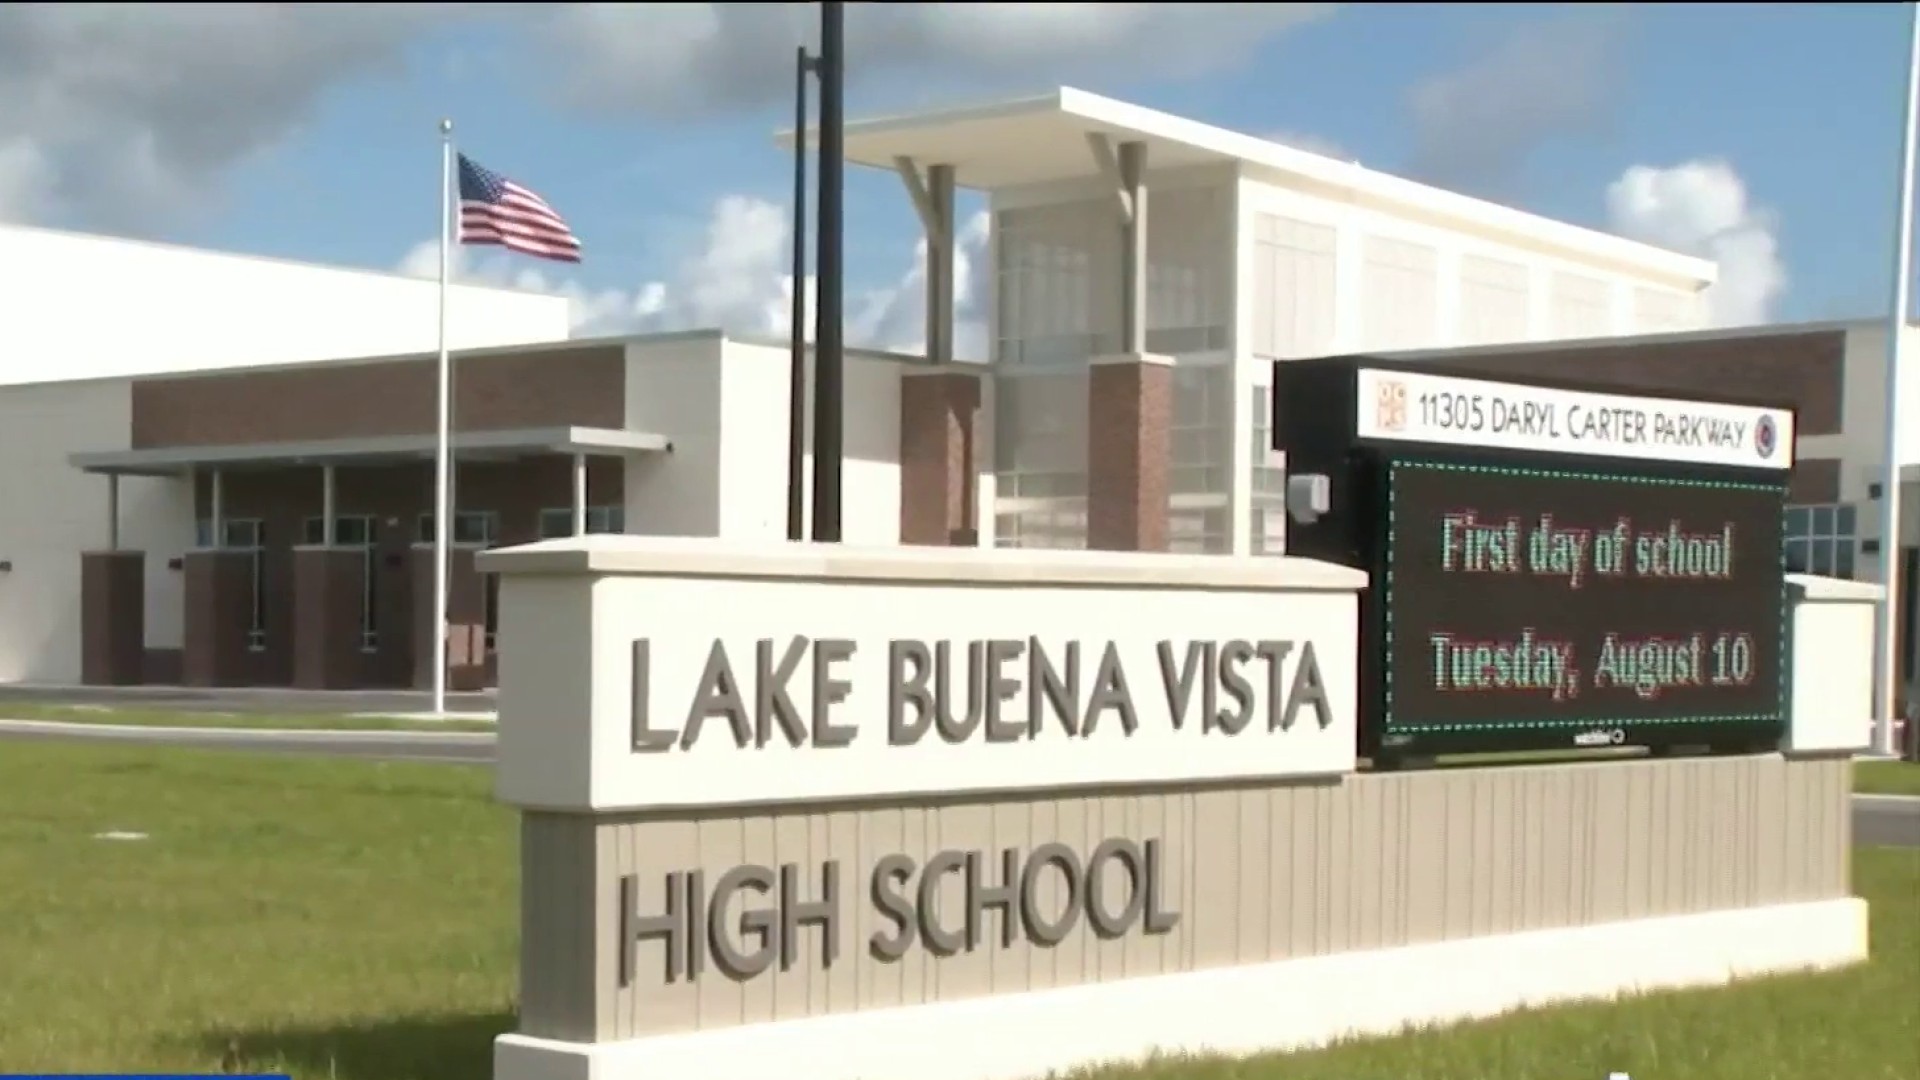 Lake Buena Vista High School opens this week, providing relief photo pic